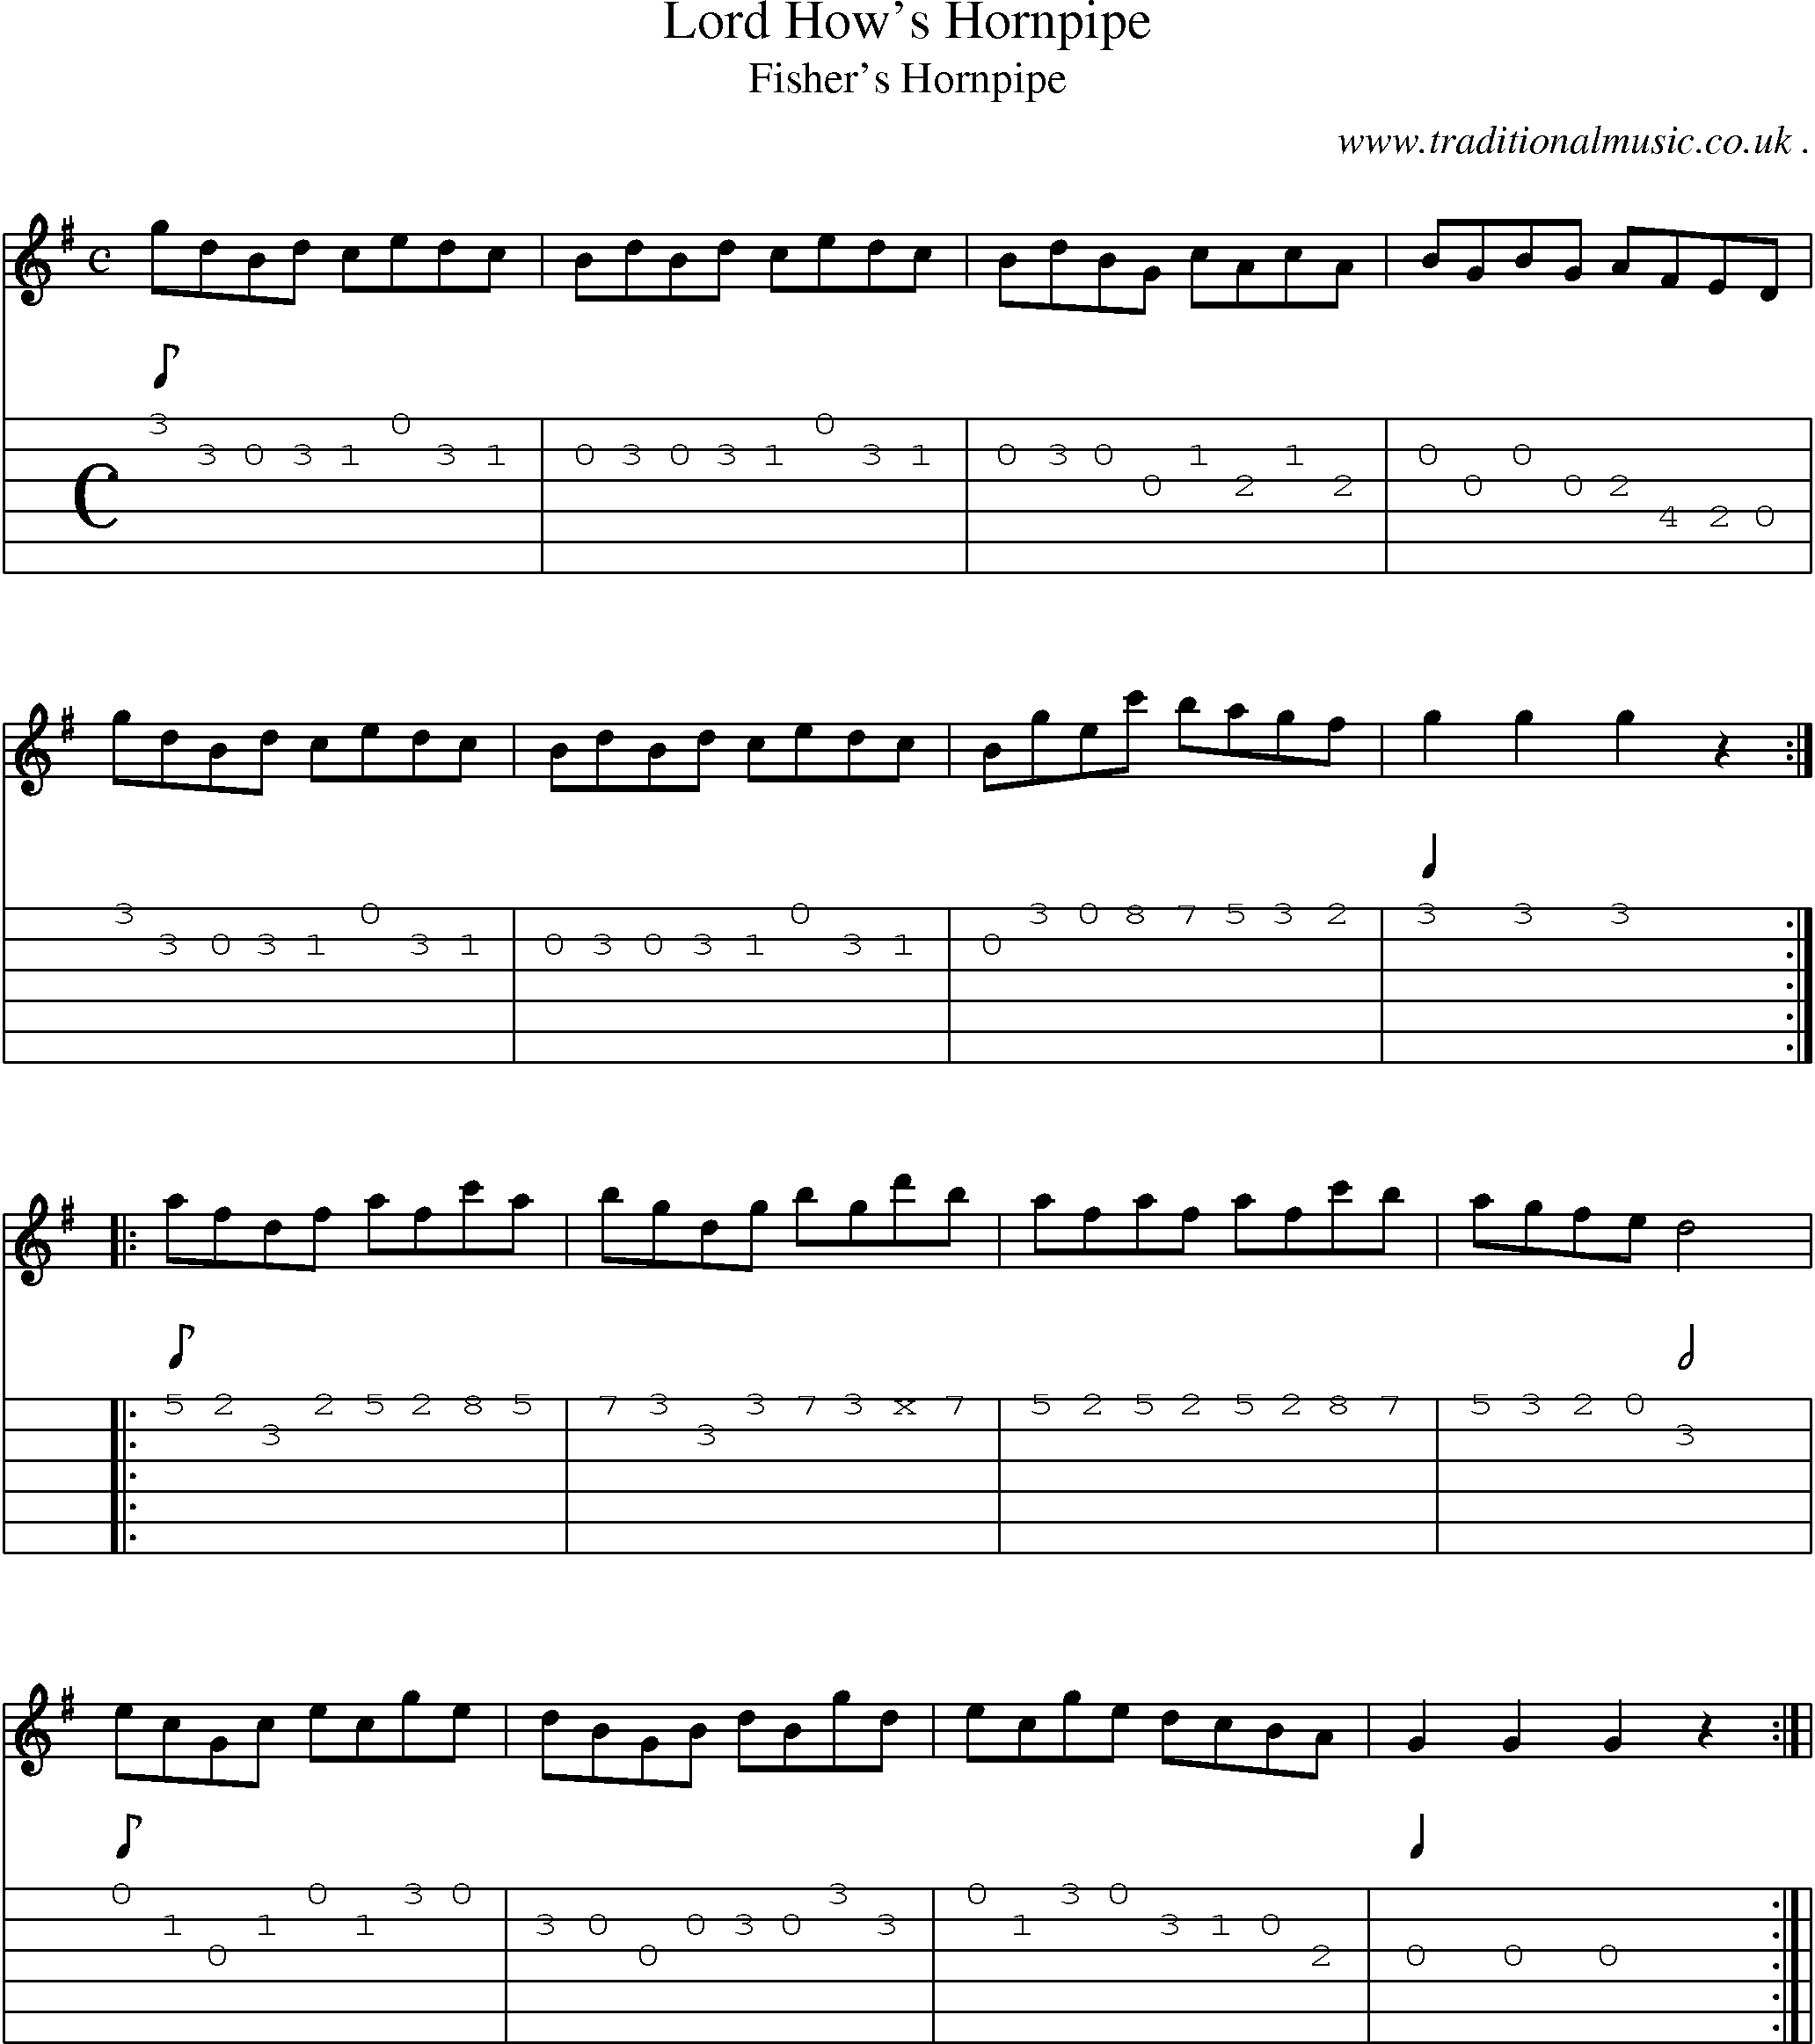 Sheet-Music and Guitar Tabs for Lord Hows Hornpipe